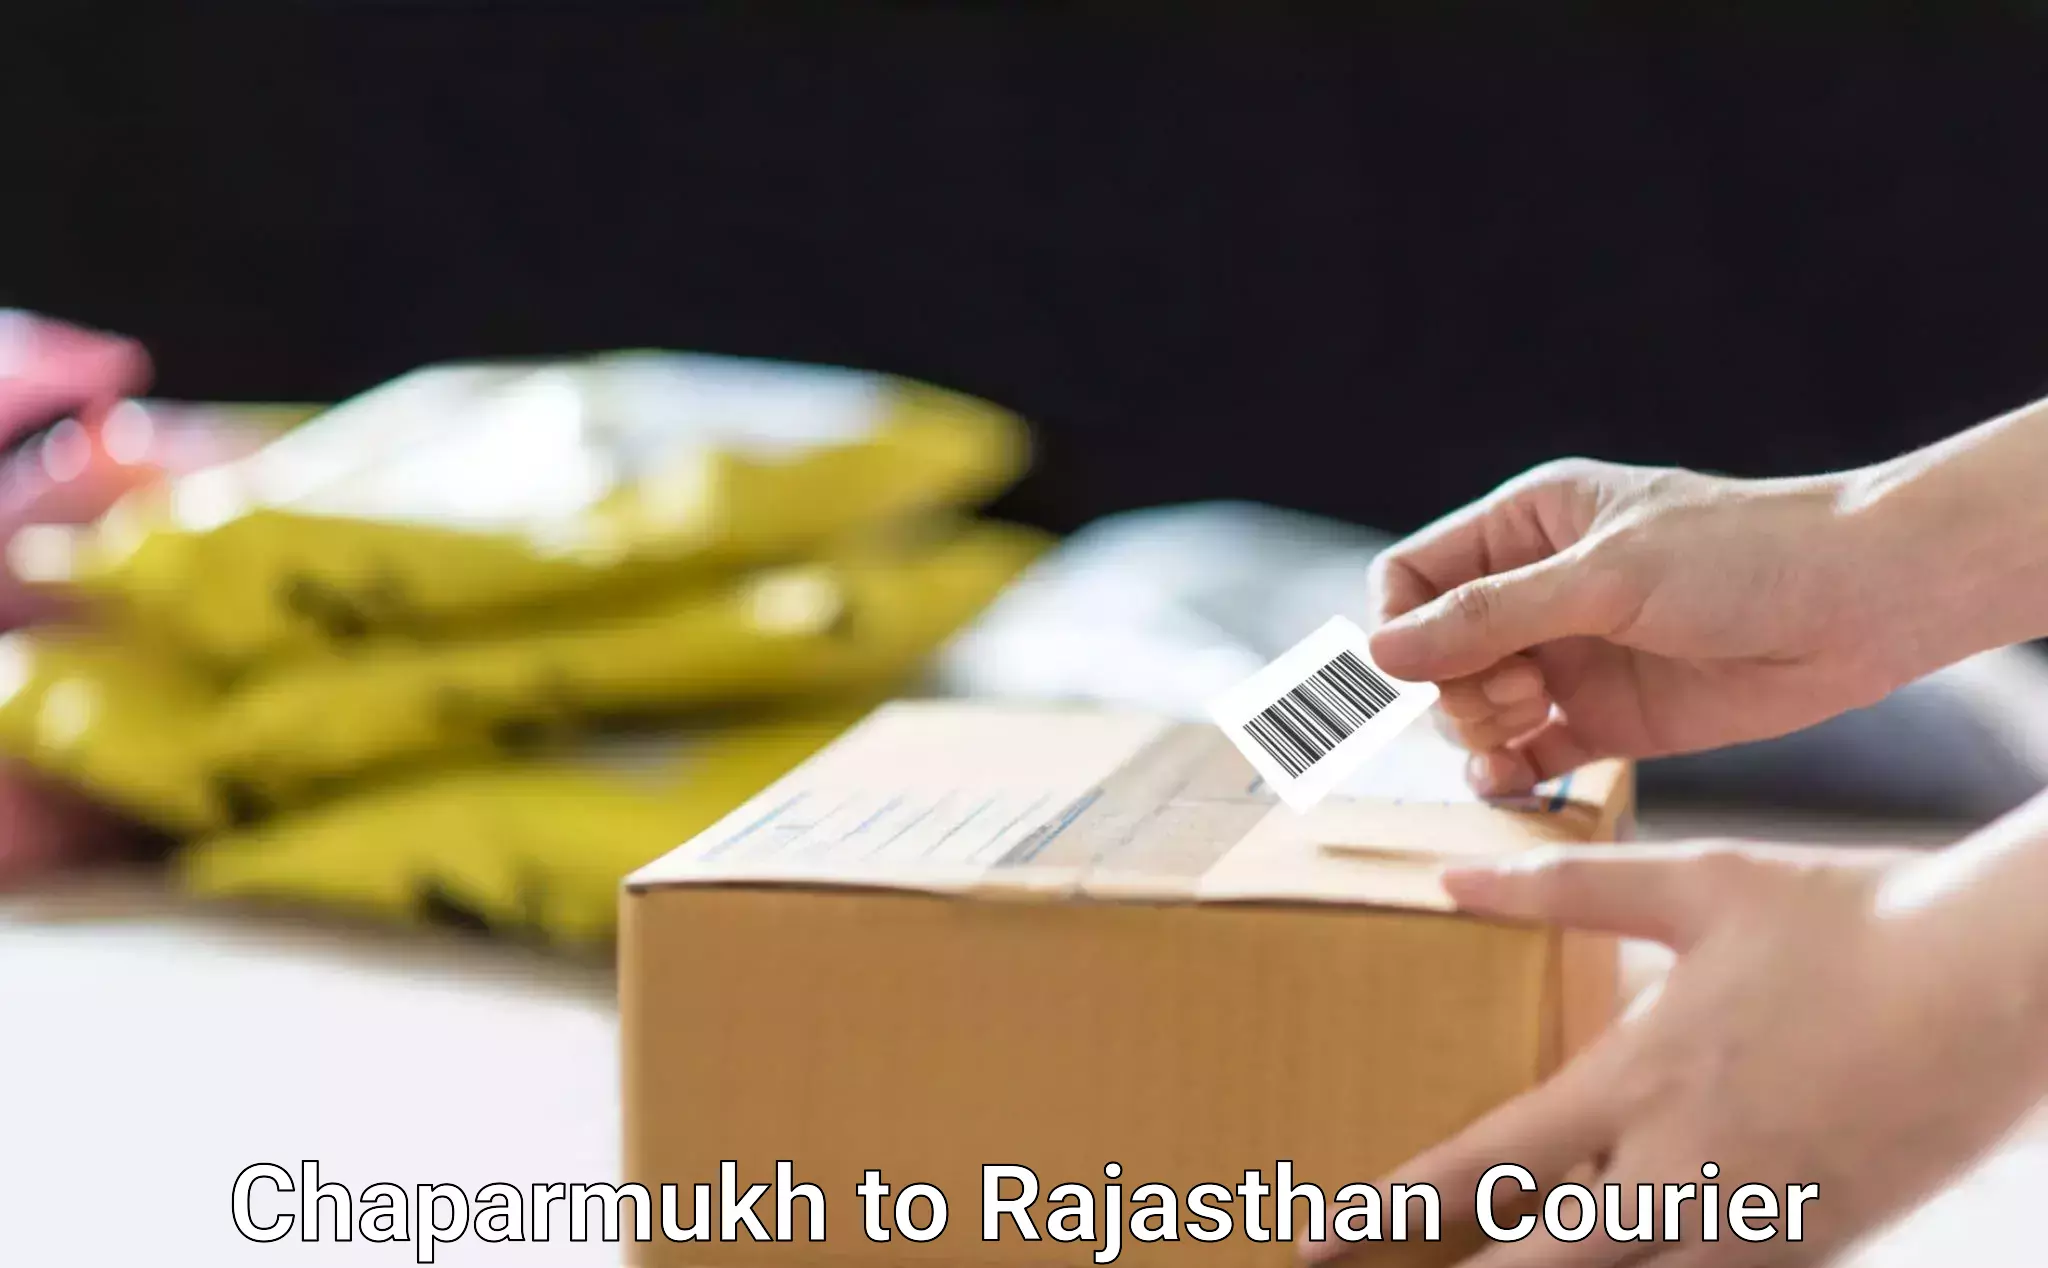 Fast delivery service Chaparmukh to Jalore